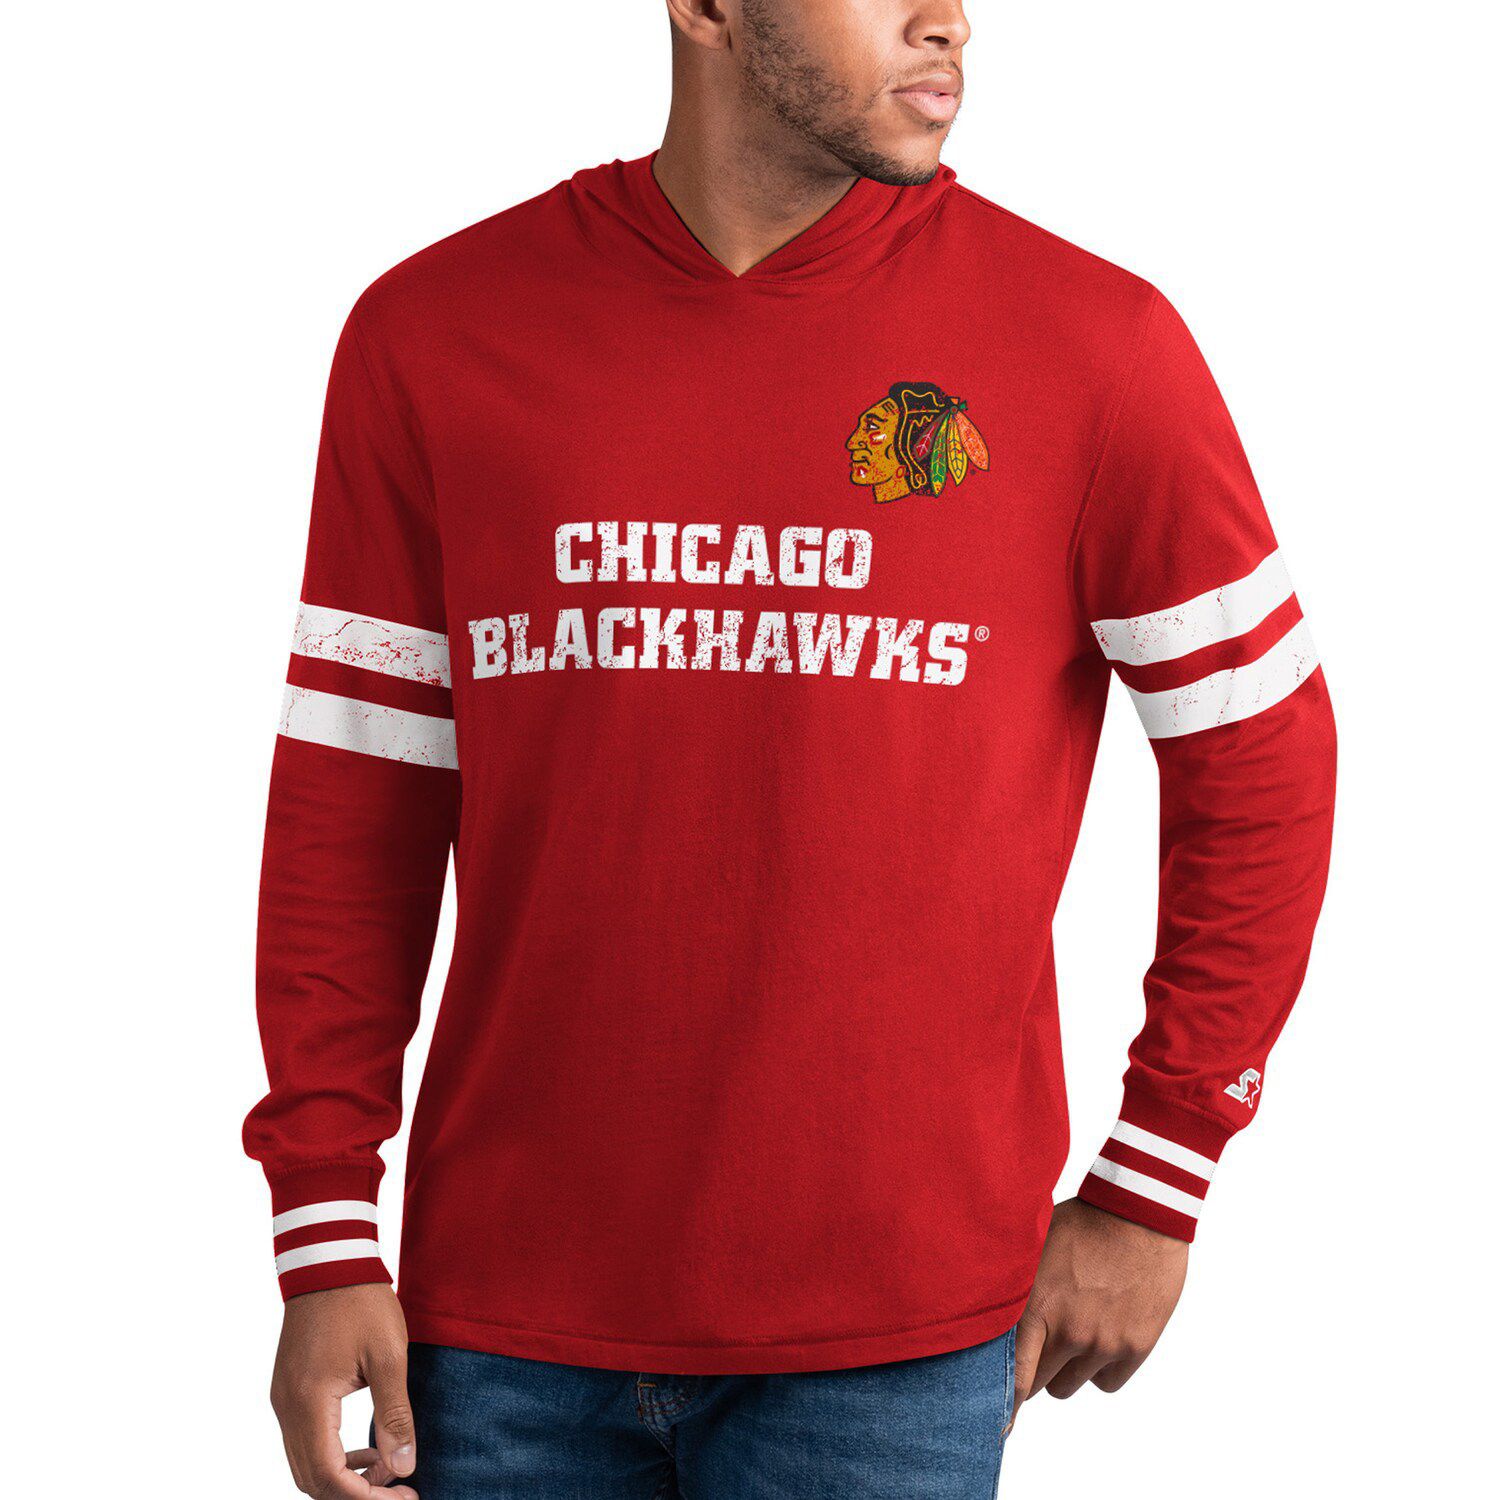 Women's Fanatics Branded Red Chicago Blackhawks Effervescent Exclusive Lace-Up Long Sleeve T-Shirt Size: Small